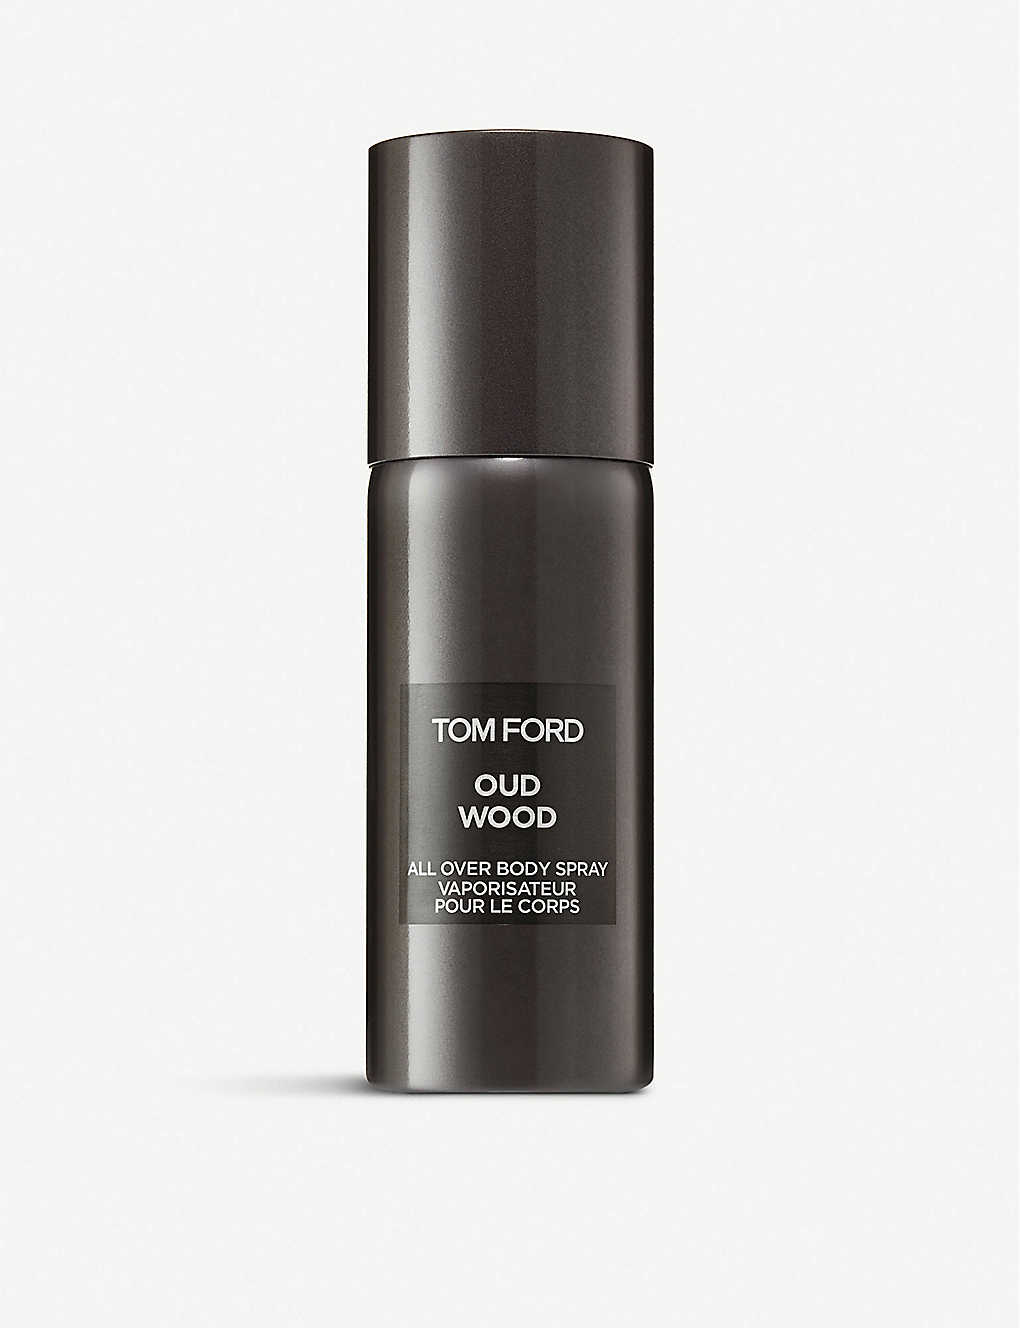 Tom Ford Oud Wood All-over Body Spray 150ml